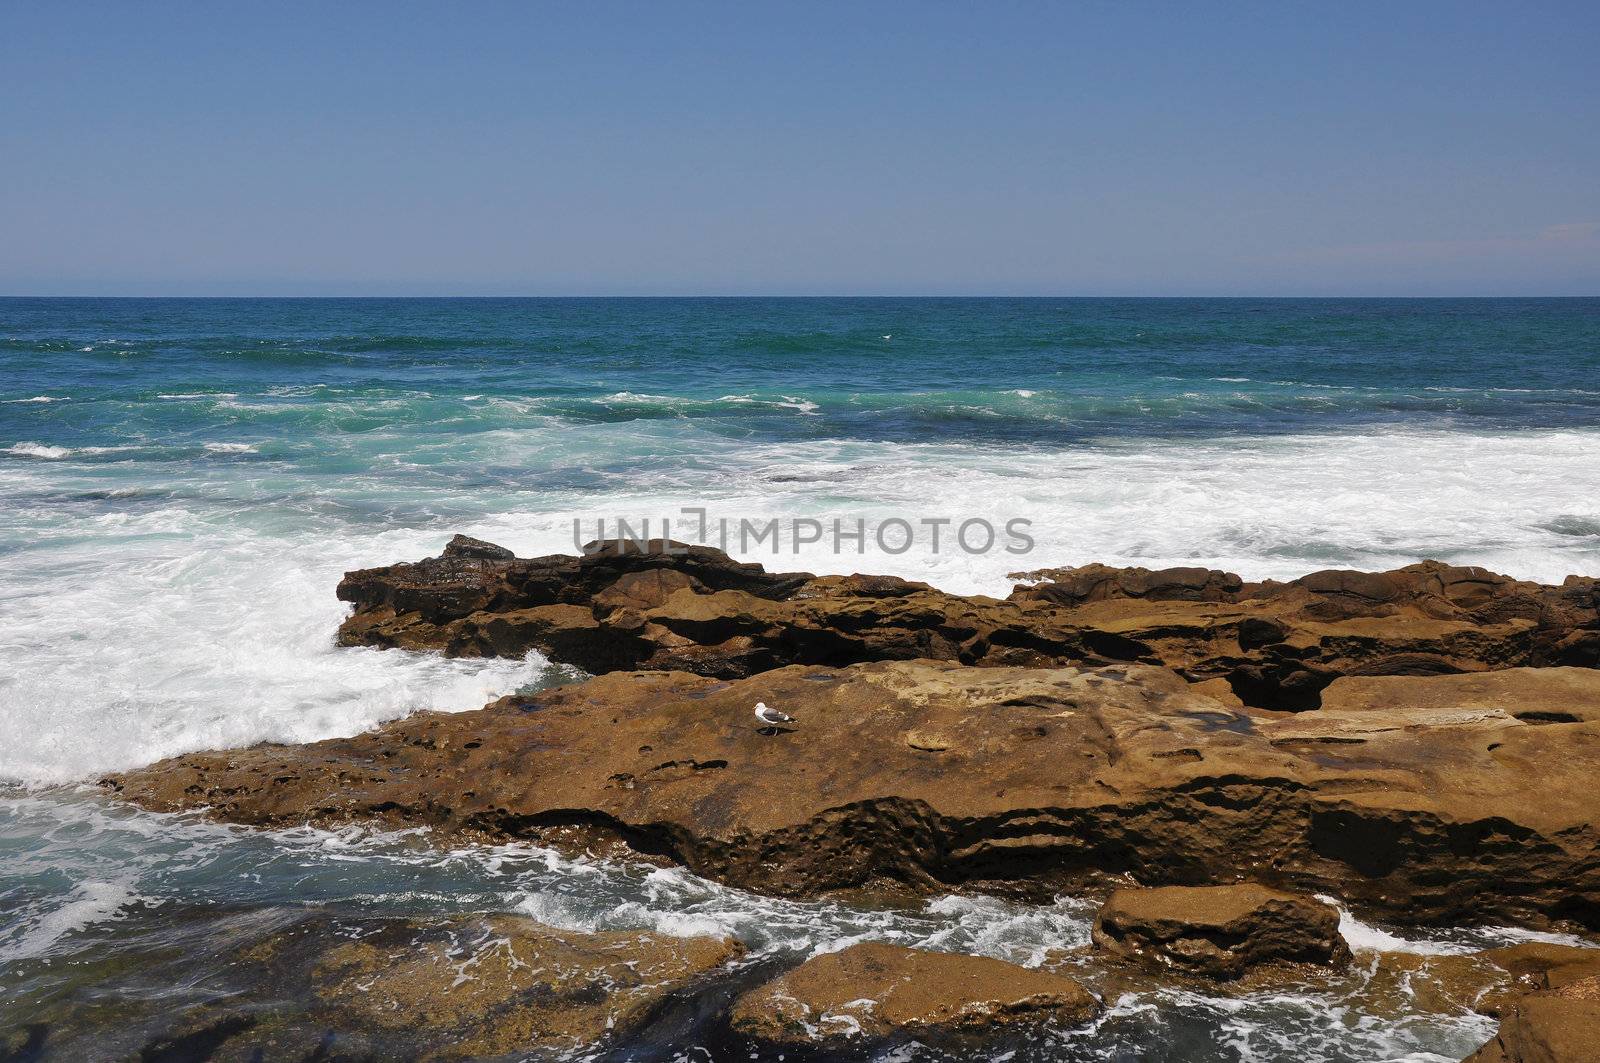 A lone seagull rests on a rocky ledge along the Southern California coastline.